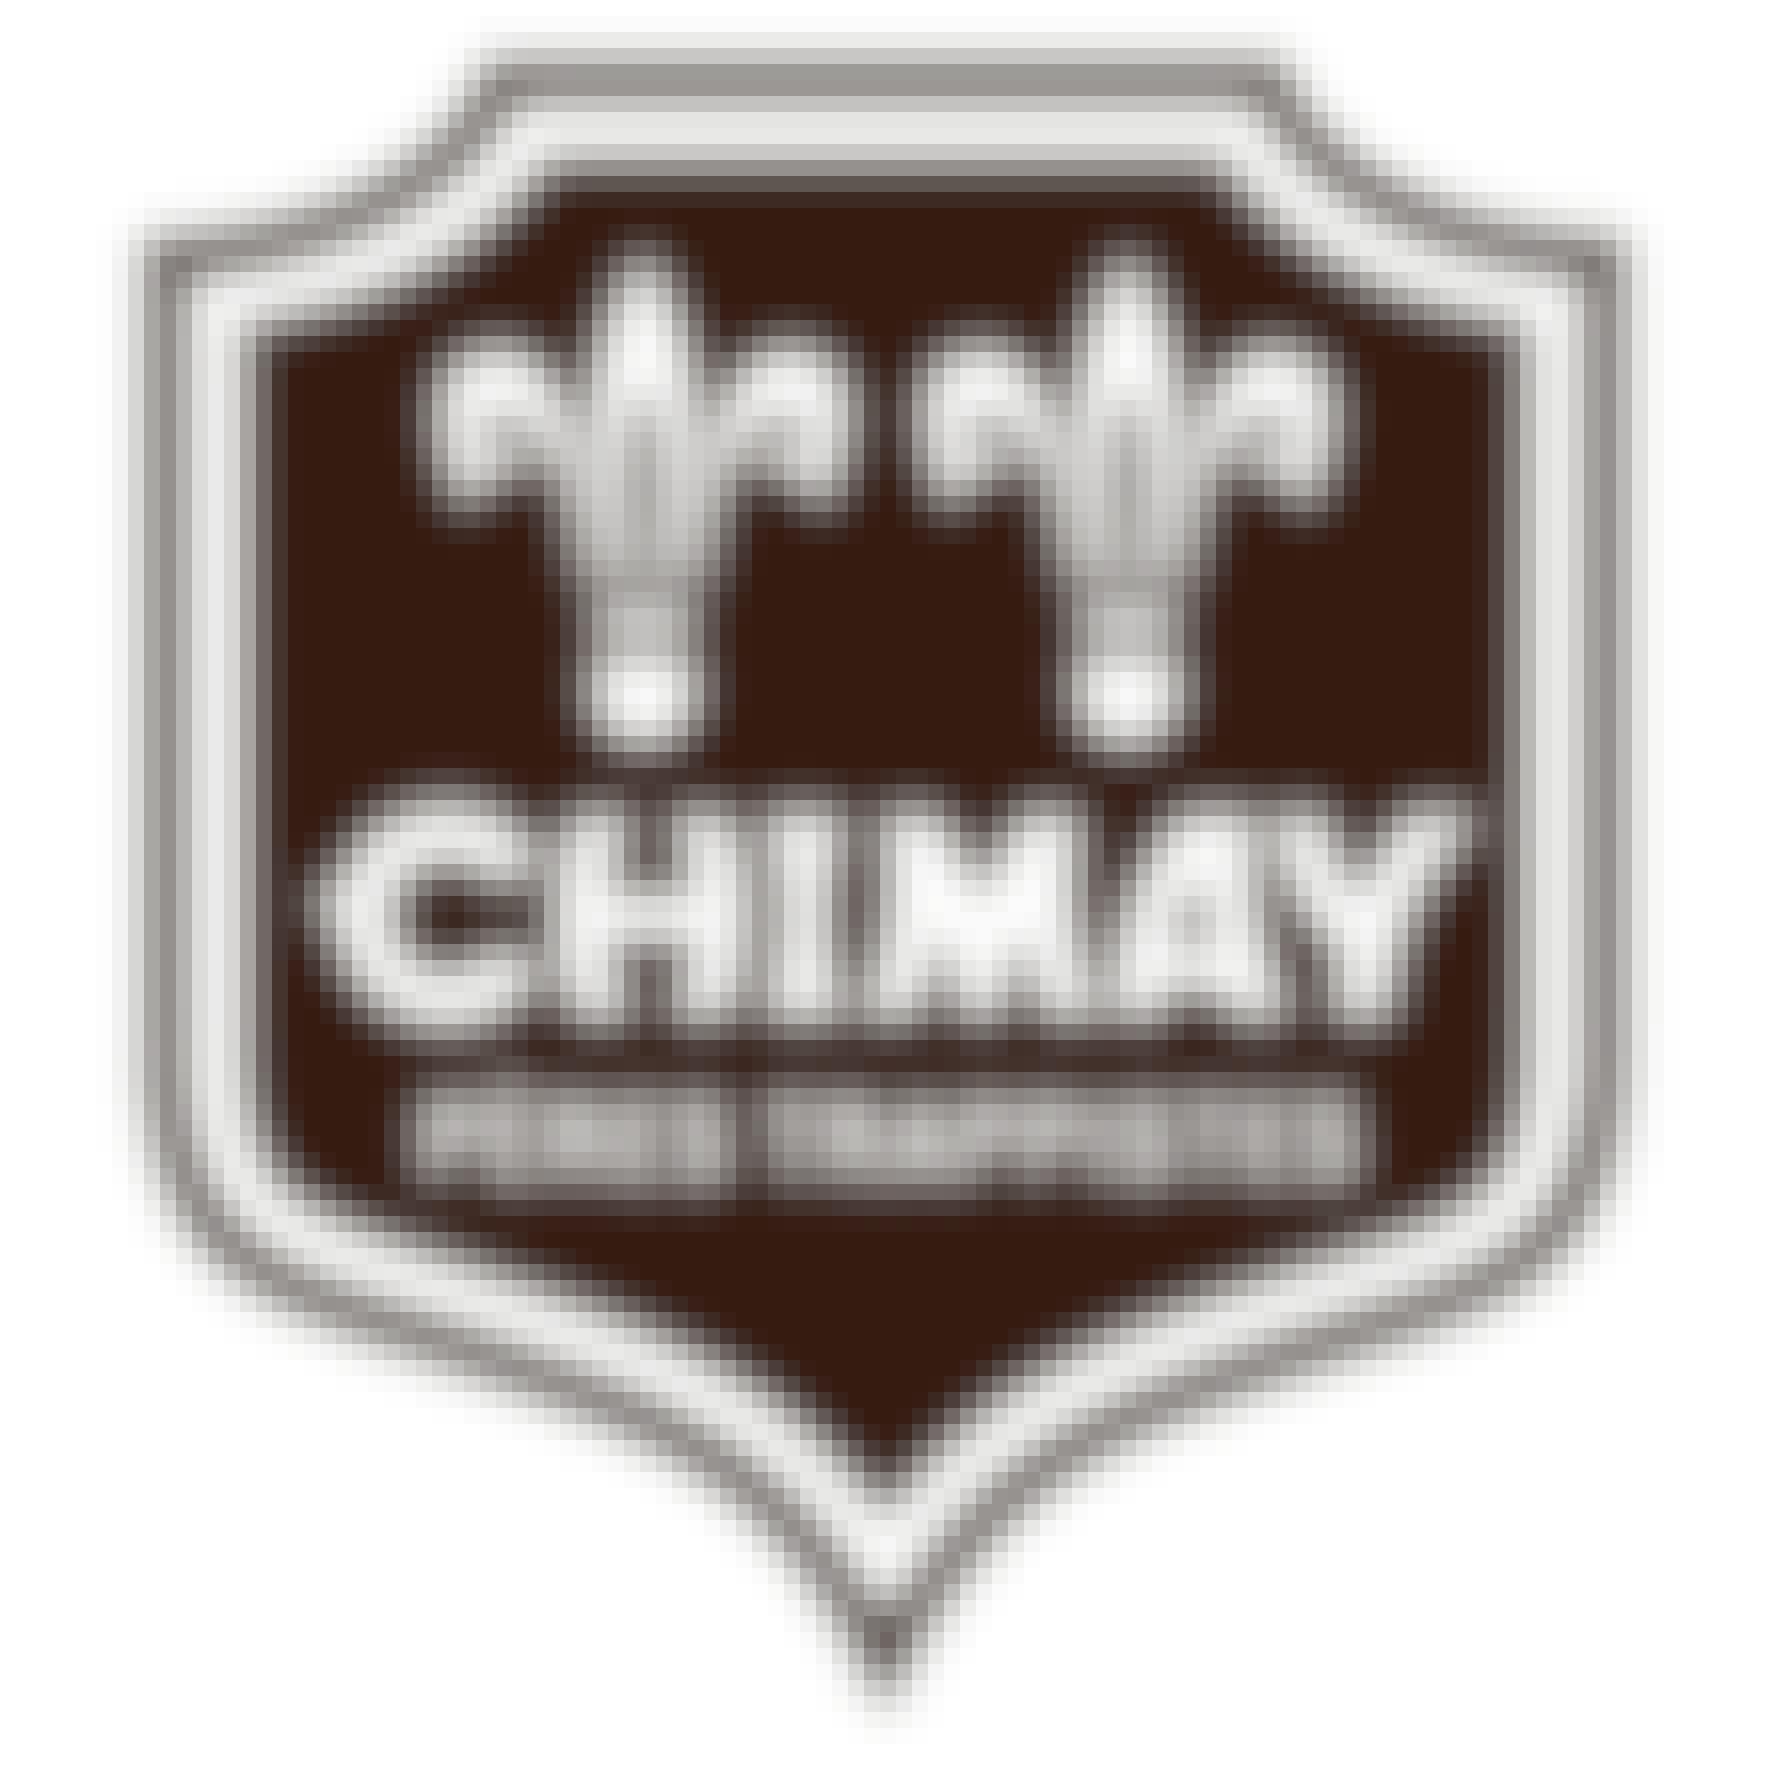 Chimay Grande Reserve Trappistes Strong Brown Ale 16 oz. Bottle